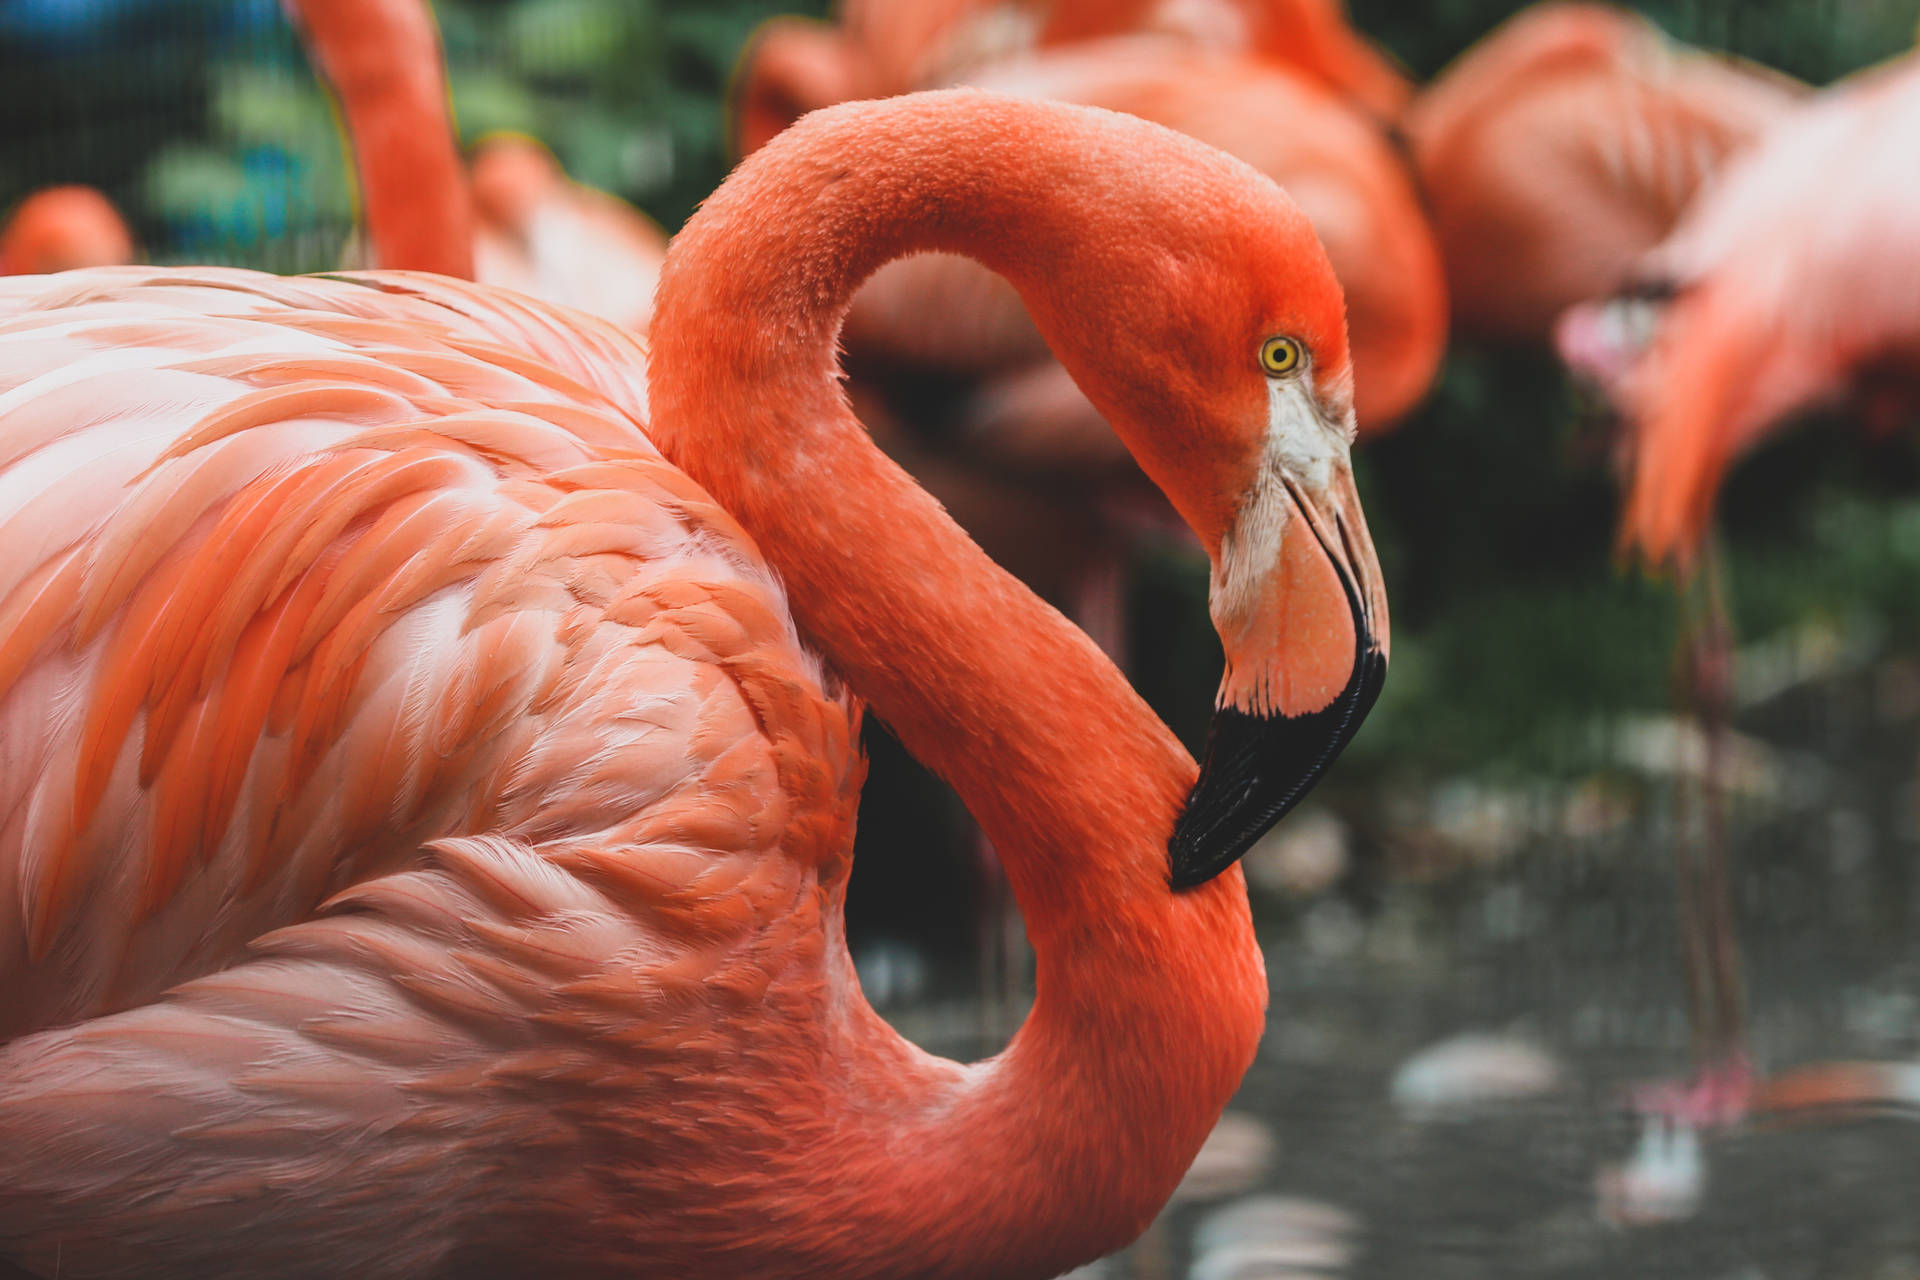 Flamingo 5114X3409 Wallpaper and Background Image